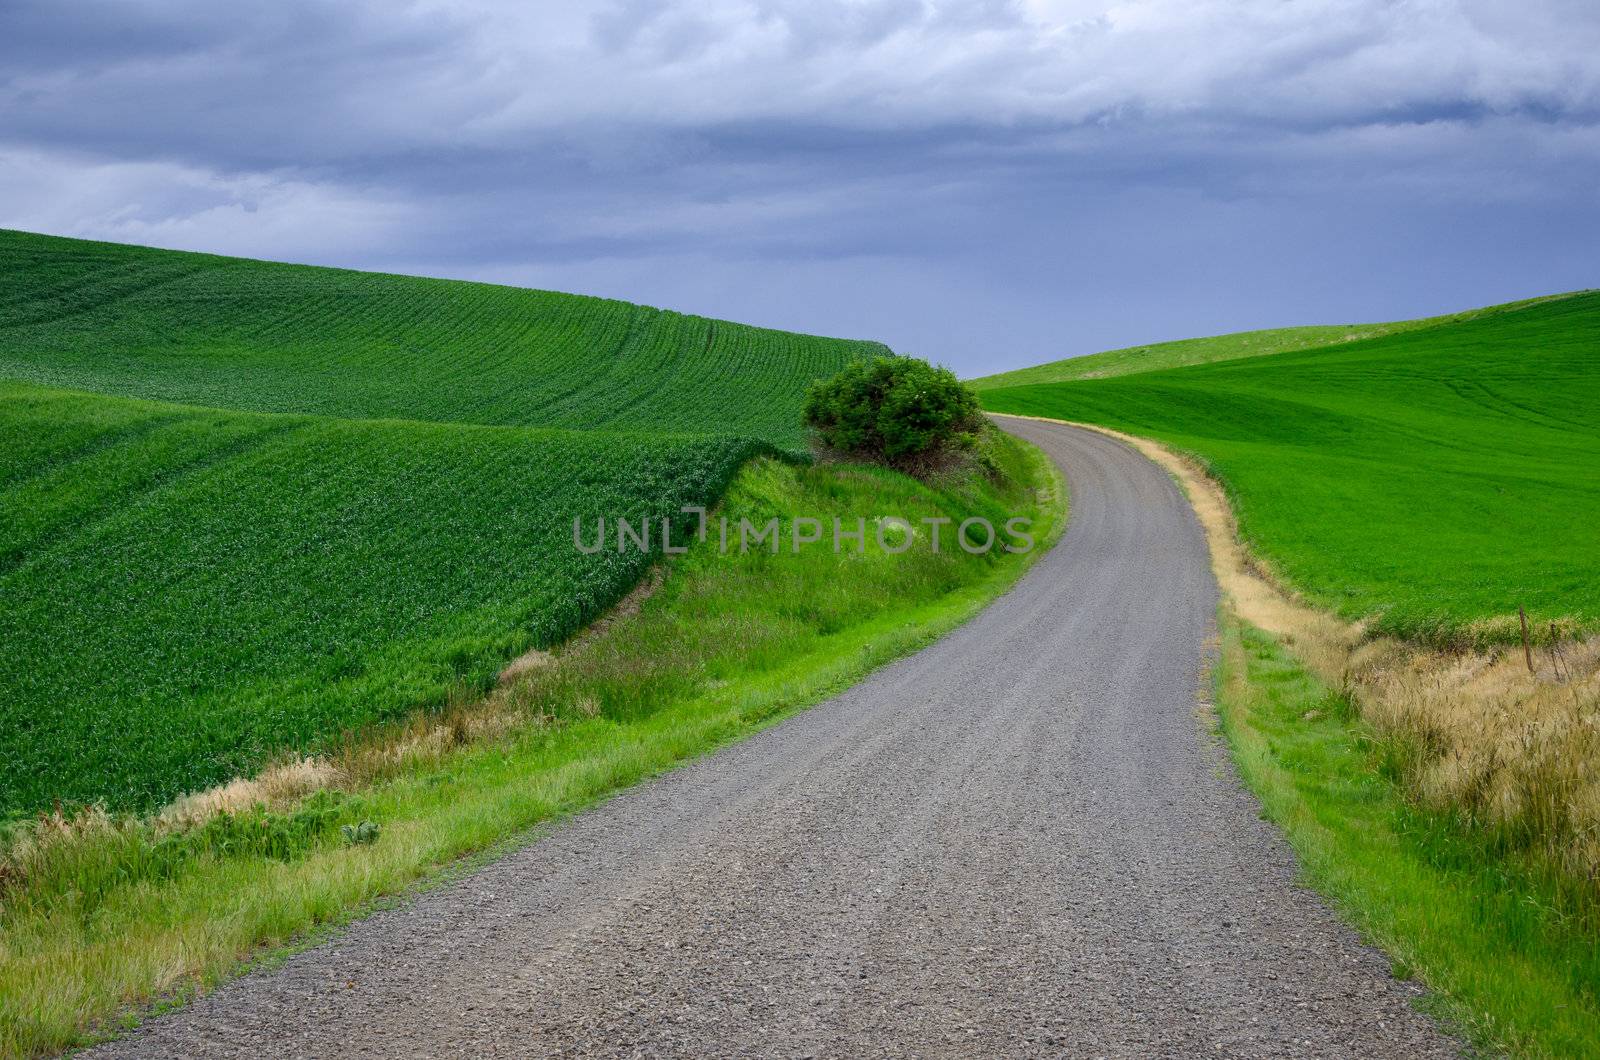 Gravel road, green wheat fields and strom clouds, Whitman County, Washington, USA by CharlesBolin